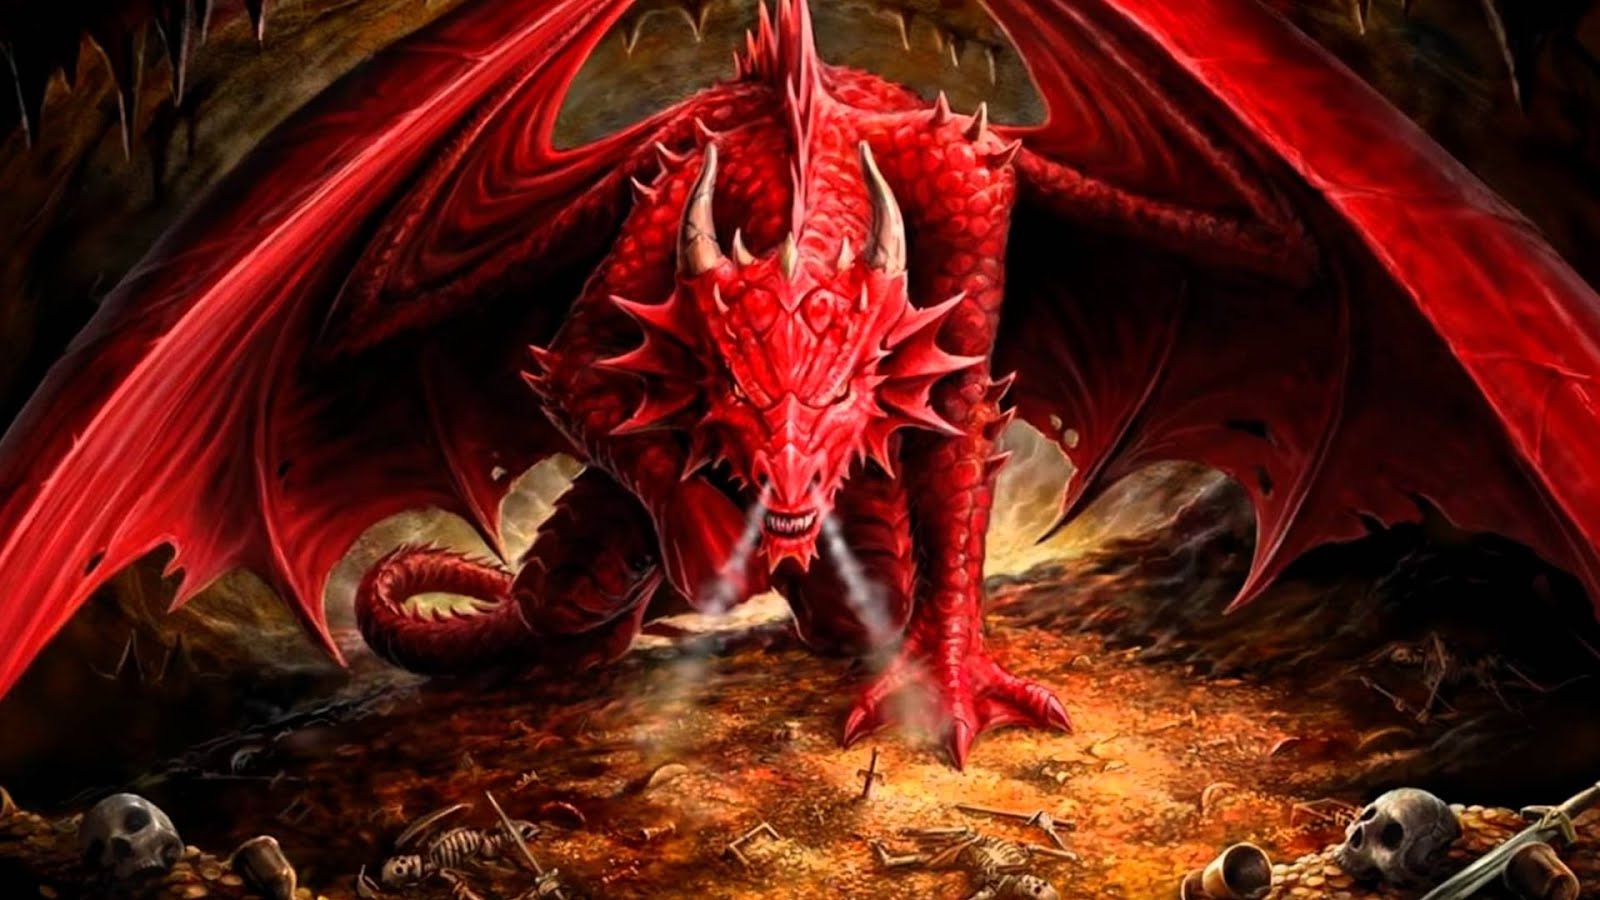 THE GREAT RED DRAGON